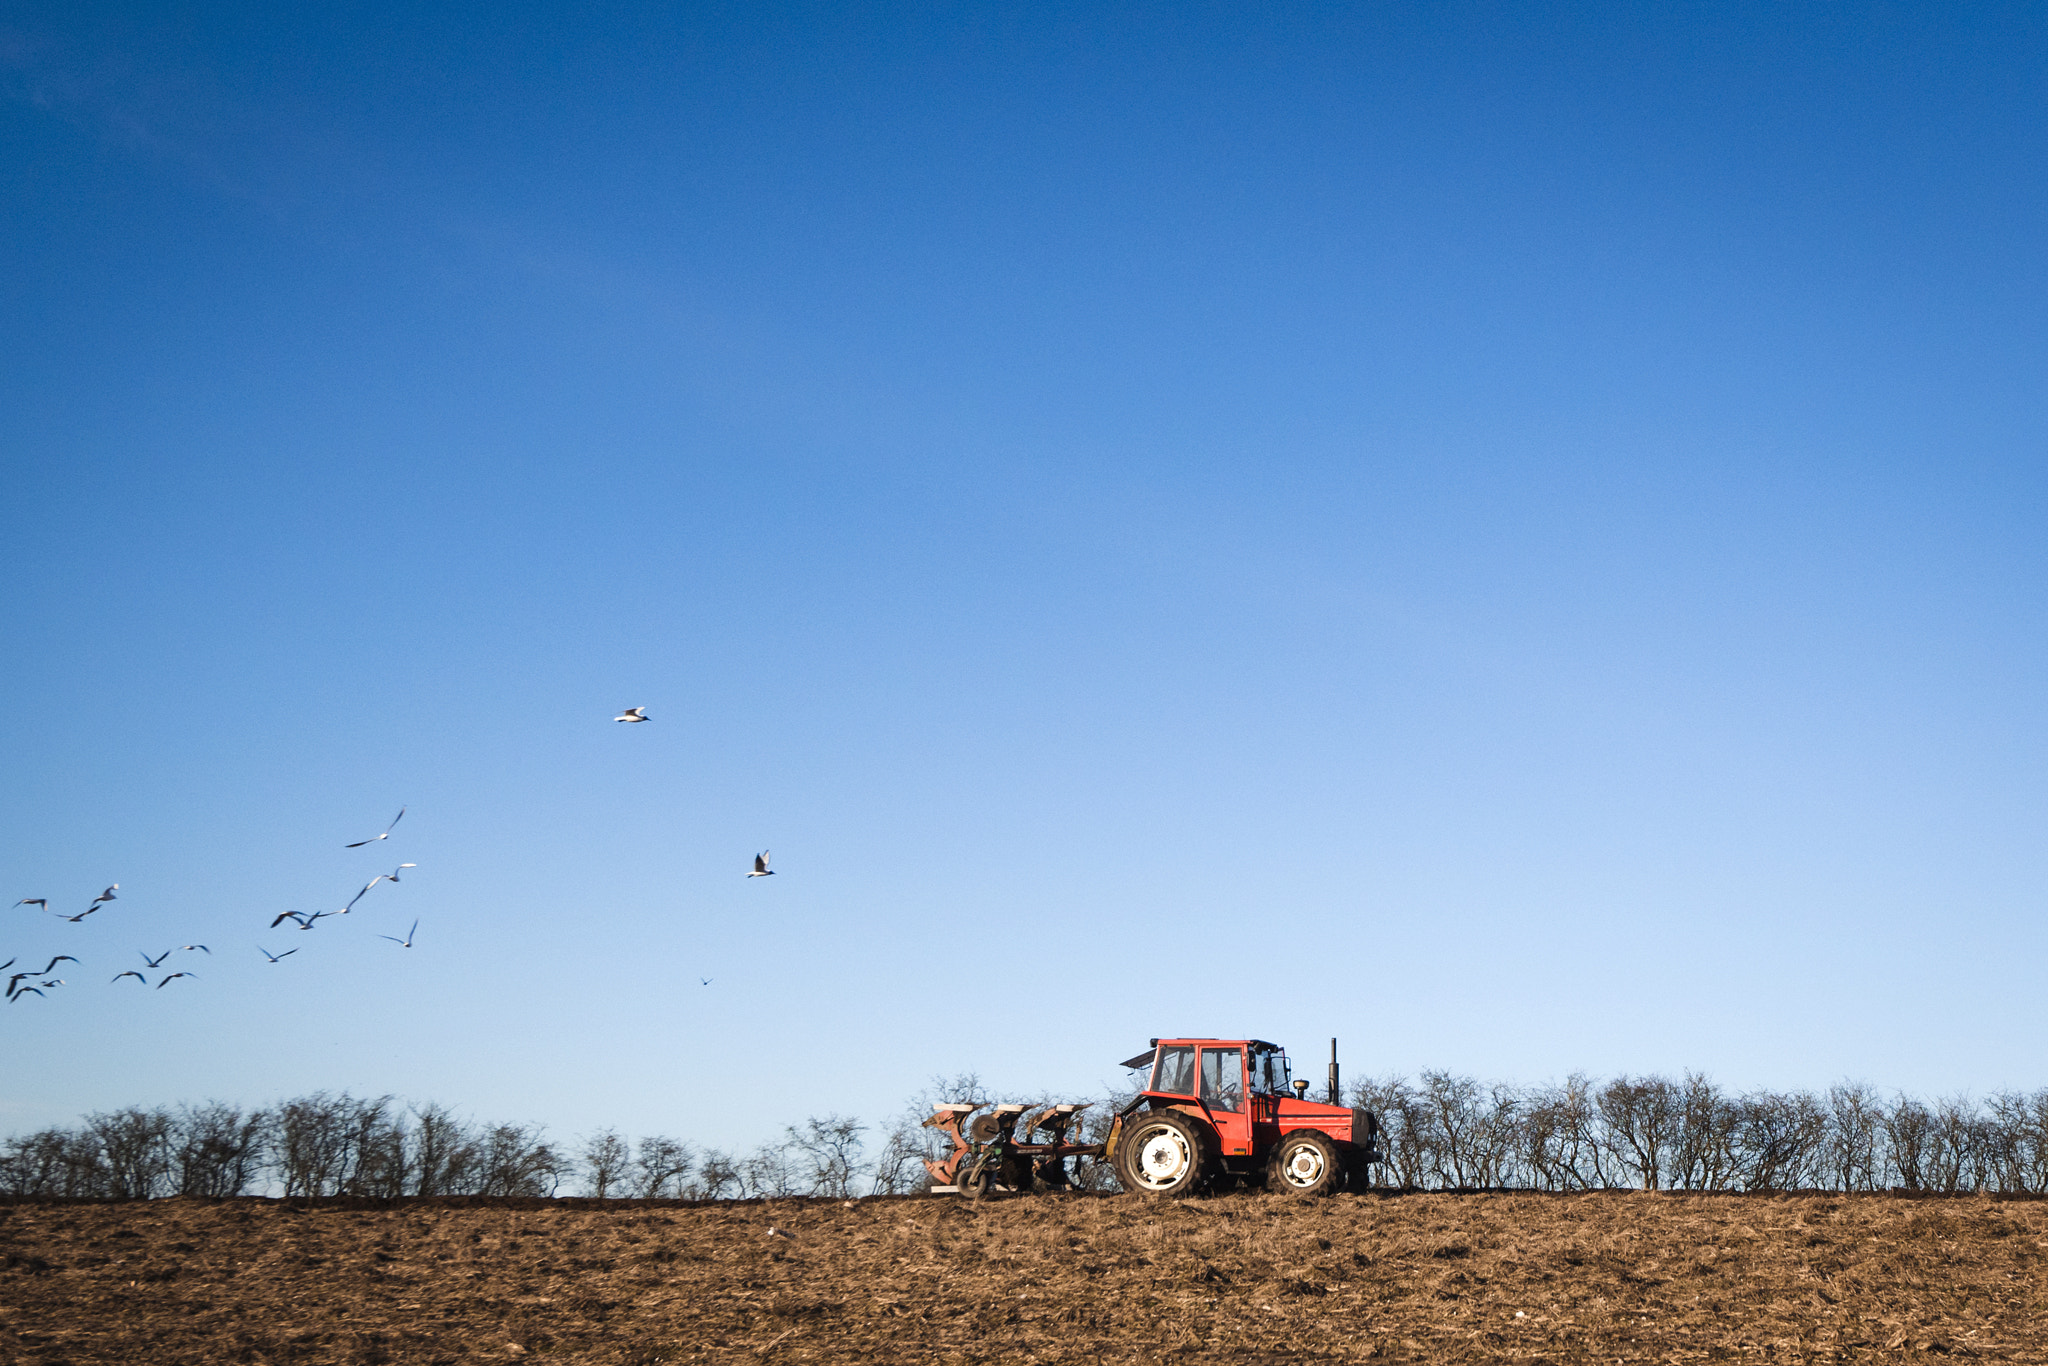 Sony a99 II sample photo. Tractor driving on a field with a plow photography